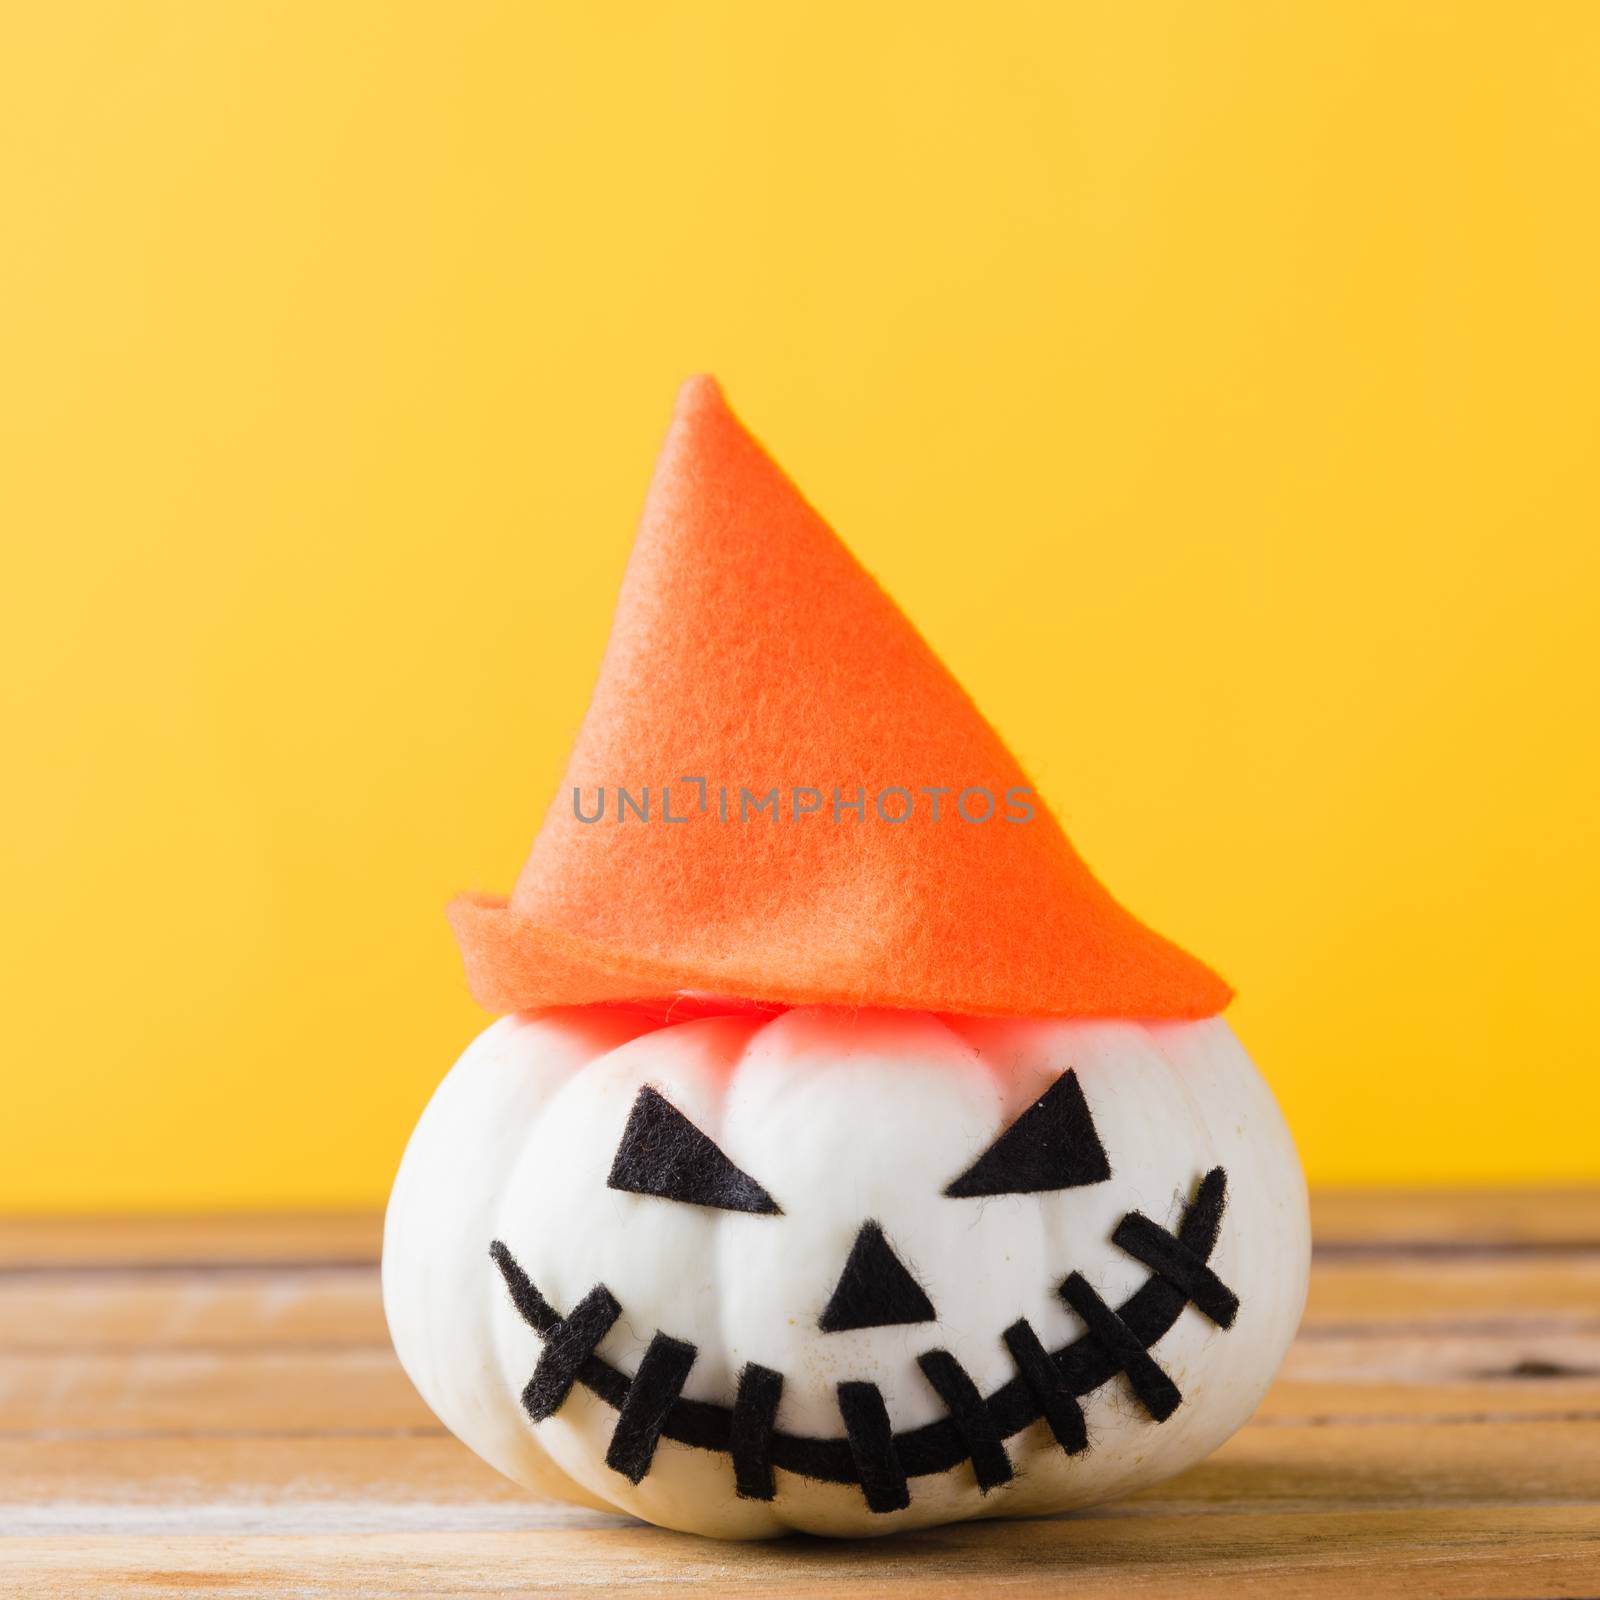 Funny Halloween day decoration party, closeup halloween pumpkin head jack o lantern smile scary on wooden and copy space, studio shot isolated yellow background, Happy holiday concept